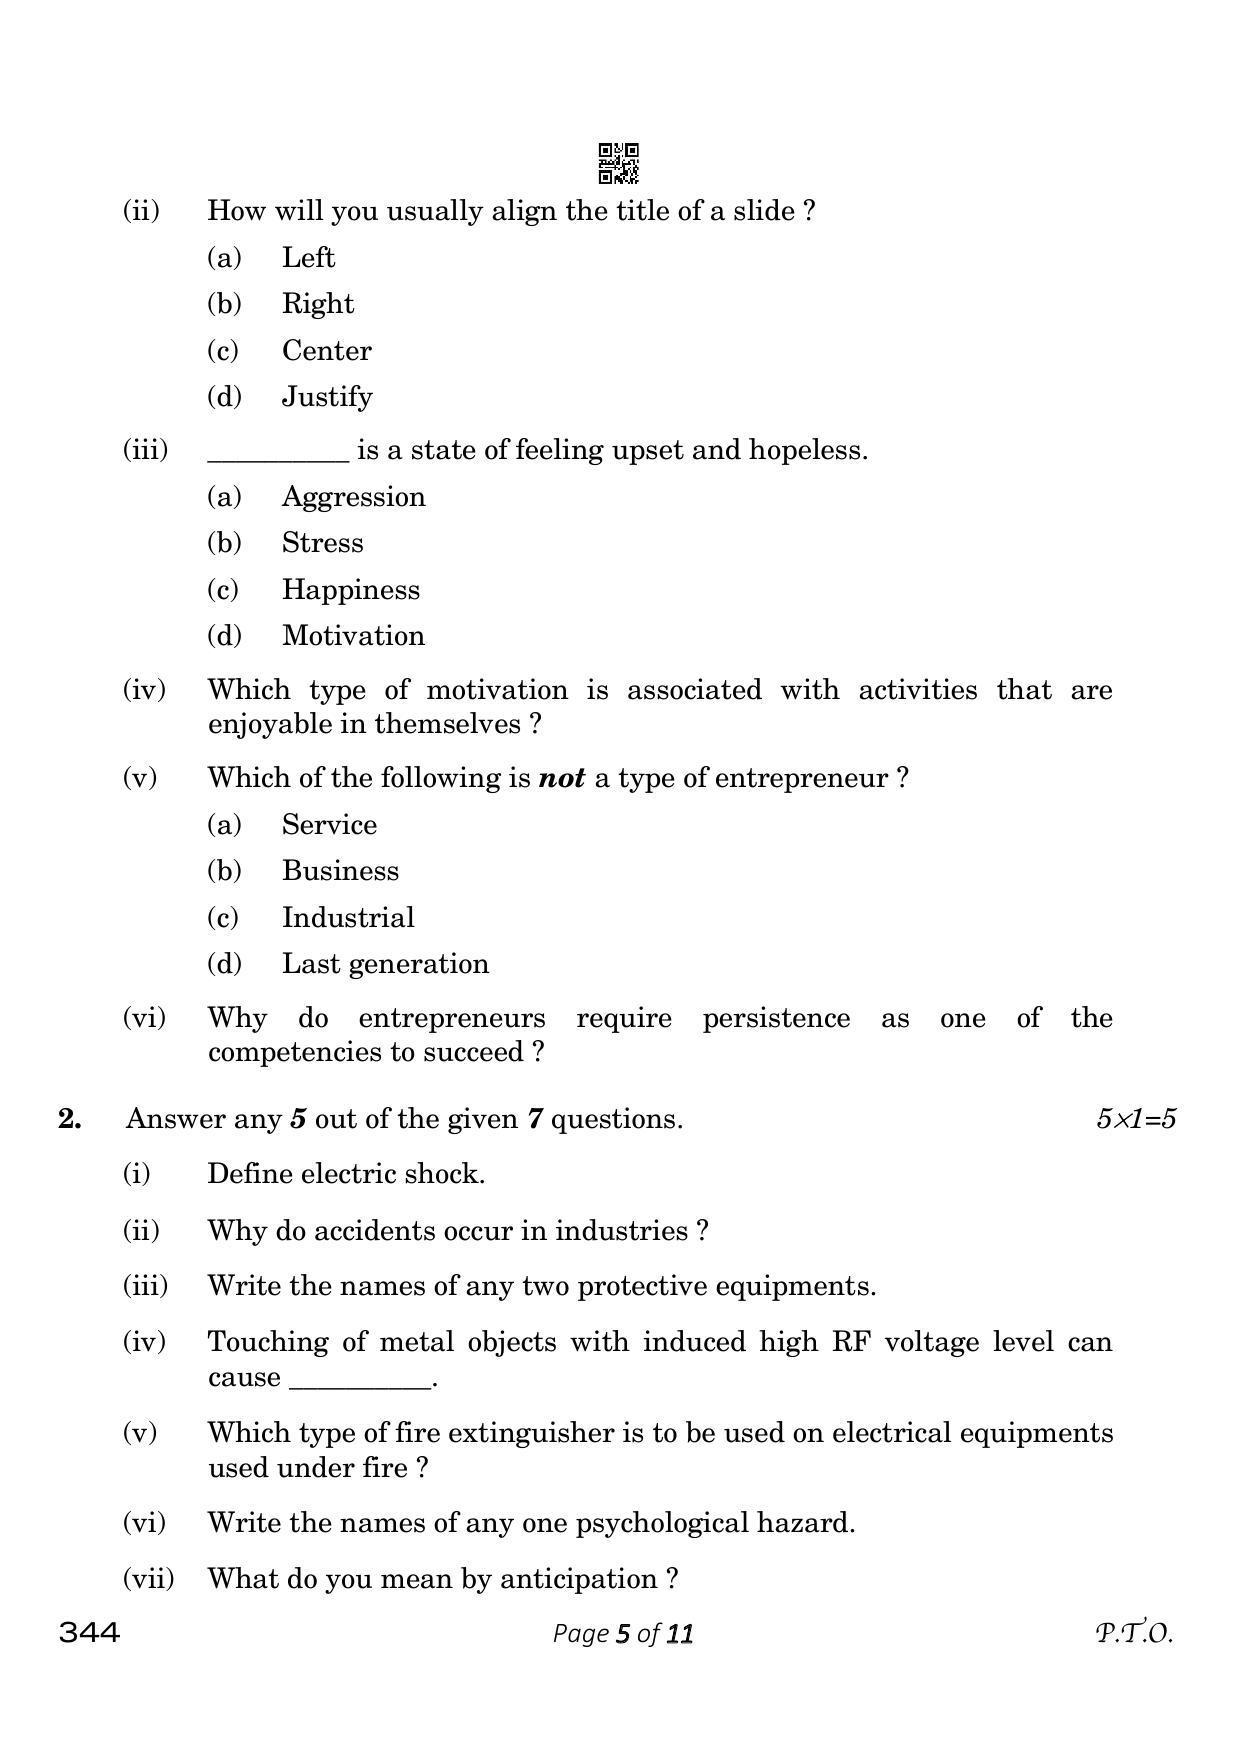 CBSE Class 12 344 Electronics Technology 2023 Question Paper - Page 5